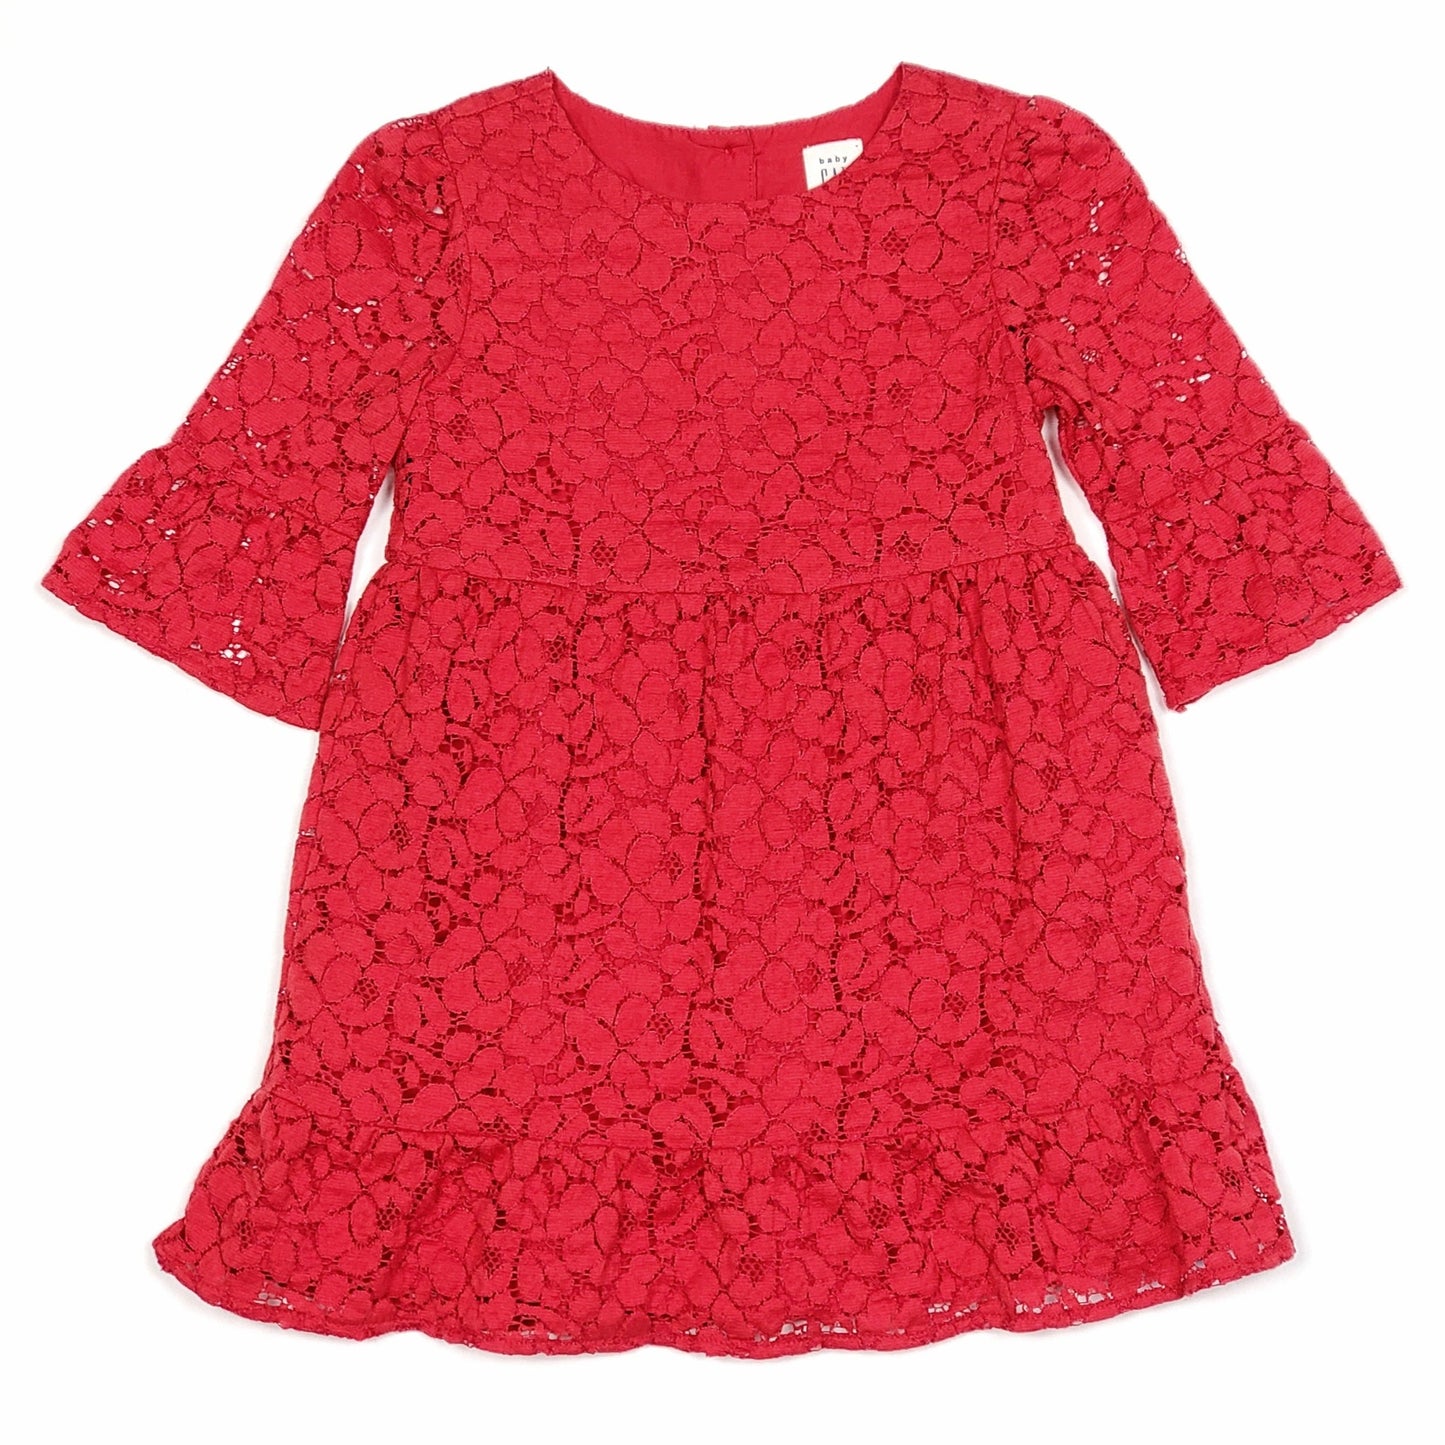 Baby Gap Girls Red Eyelet Floral Dress Size 2 Used, front